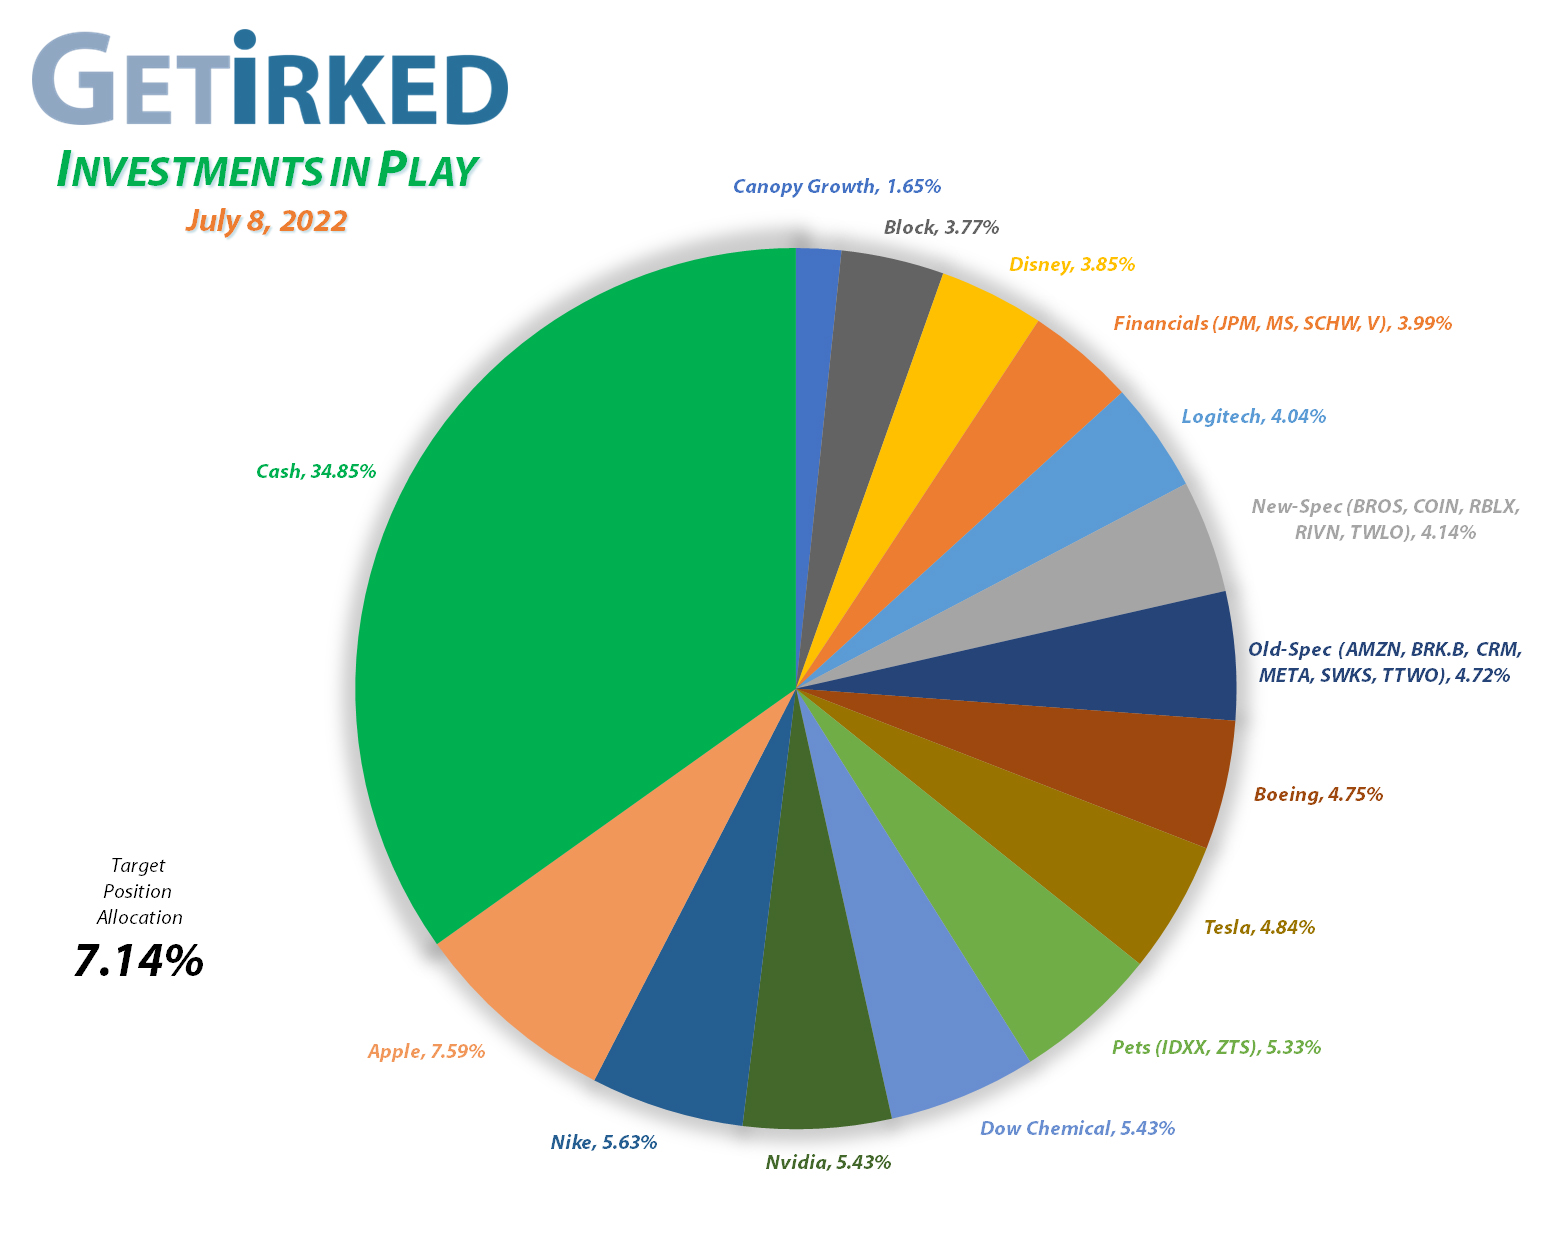 Get Irked - Investments in Play - Current Holdings - July 8, 2022